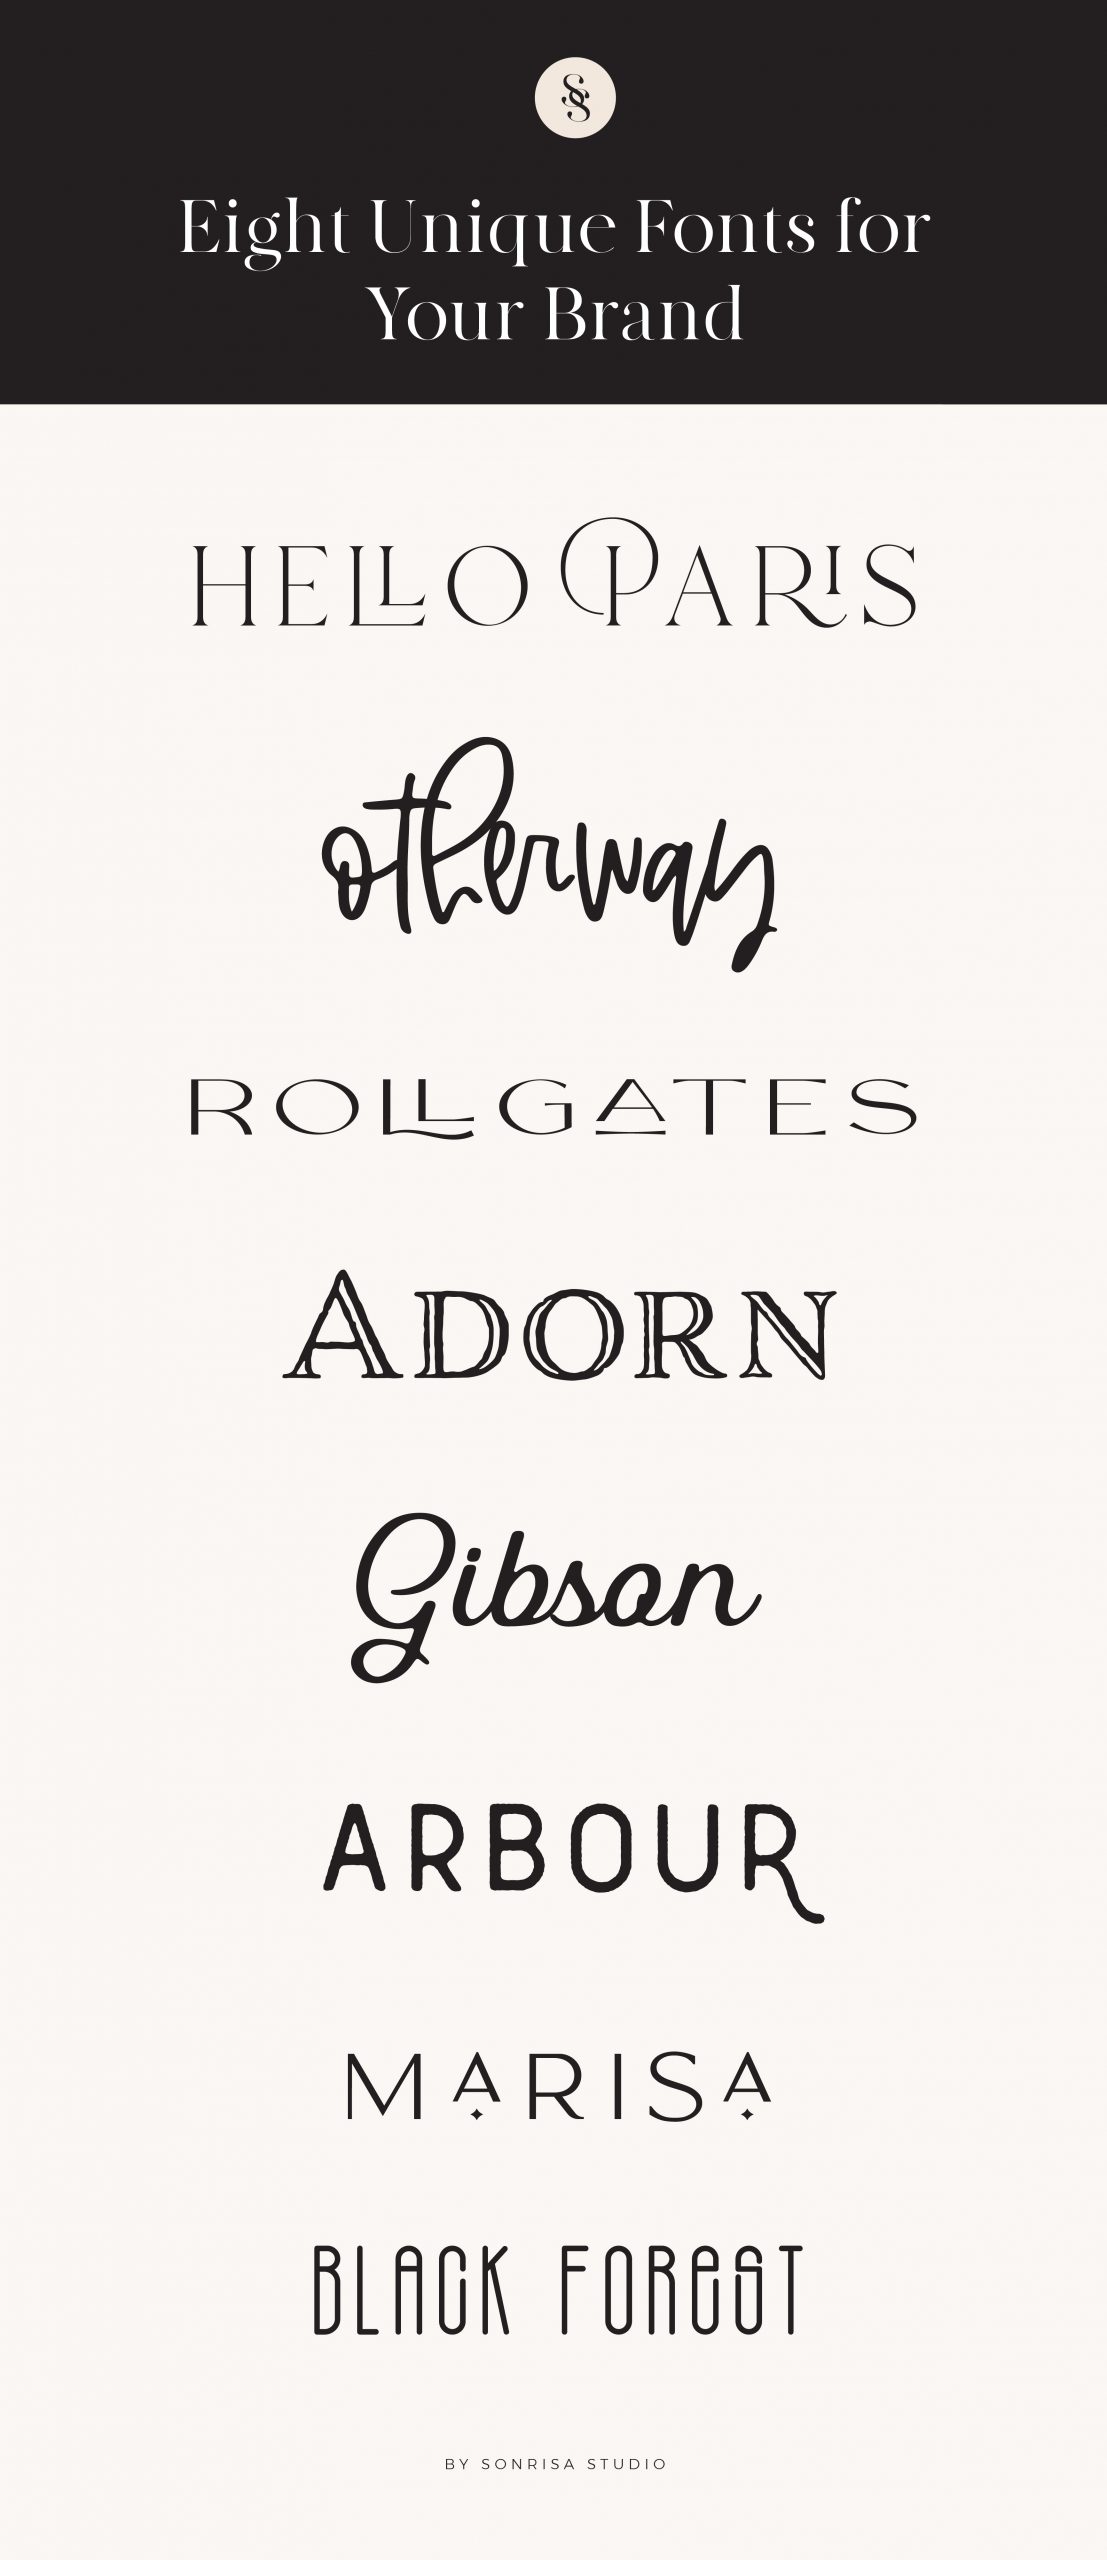 Eight unique fonts for your brand